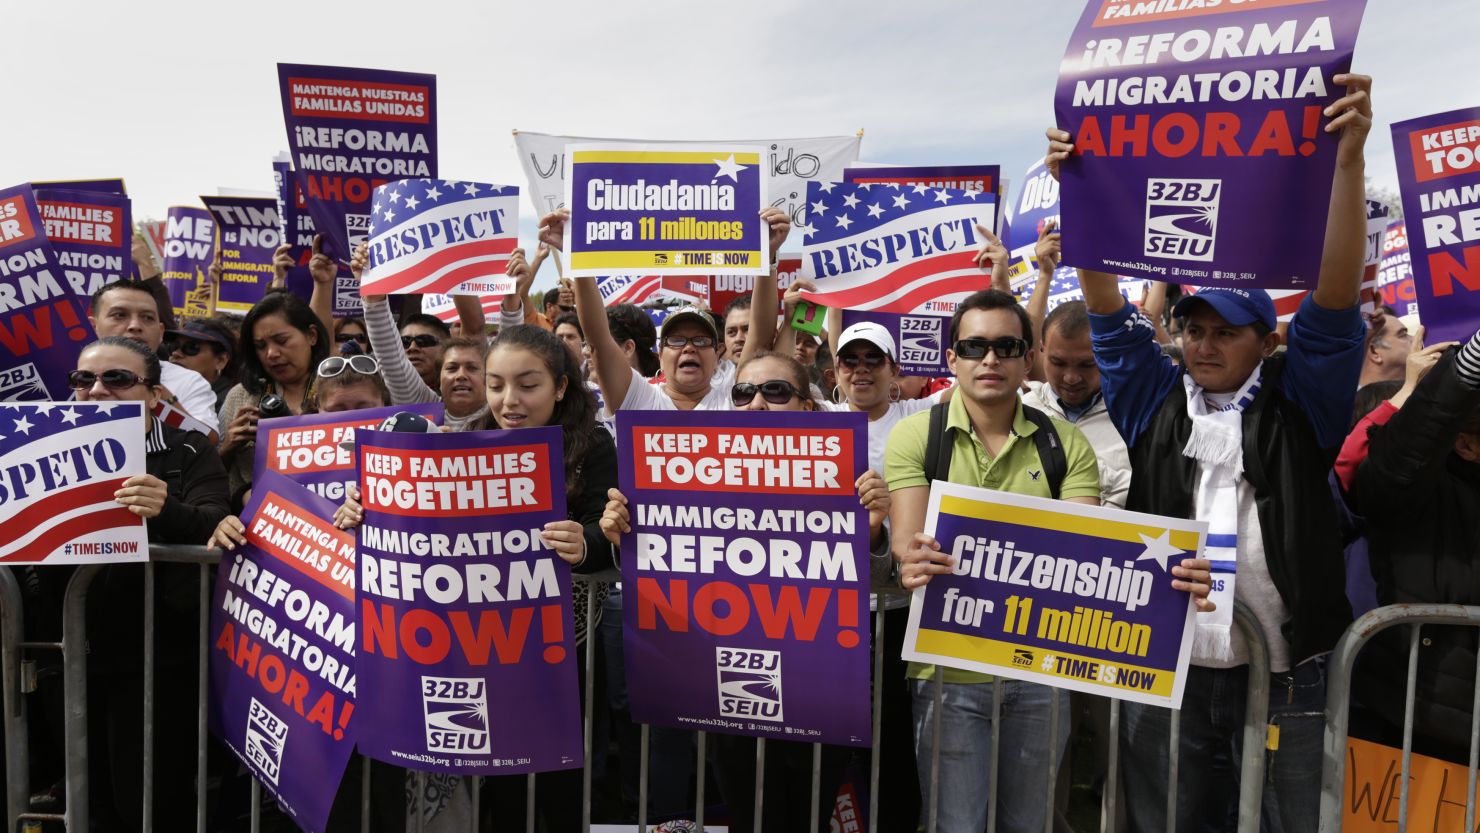 People rally in Washington in October in support of immigration reform. Tamar Jacoby says 2014 could be the year.